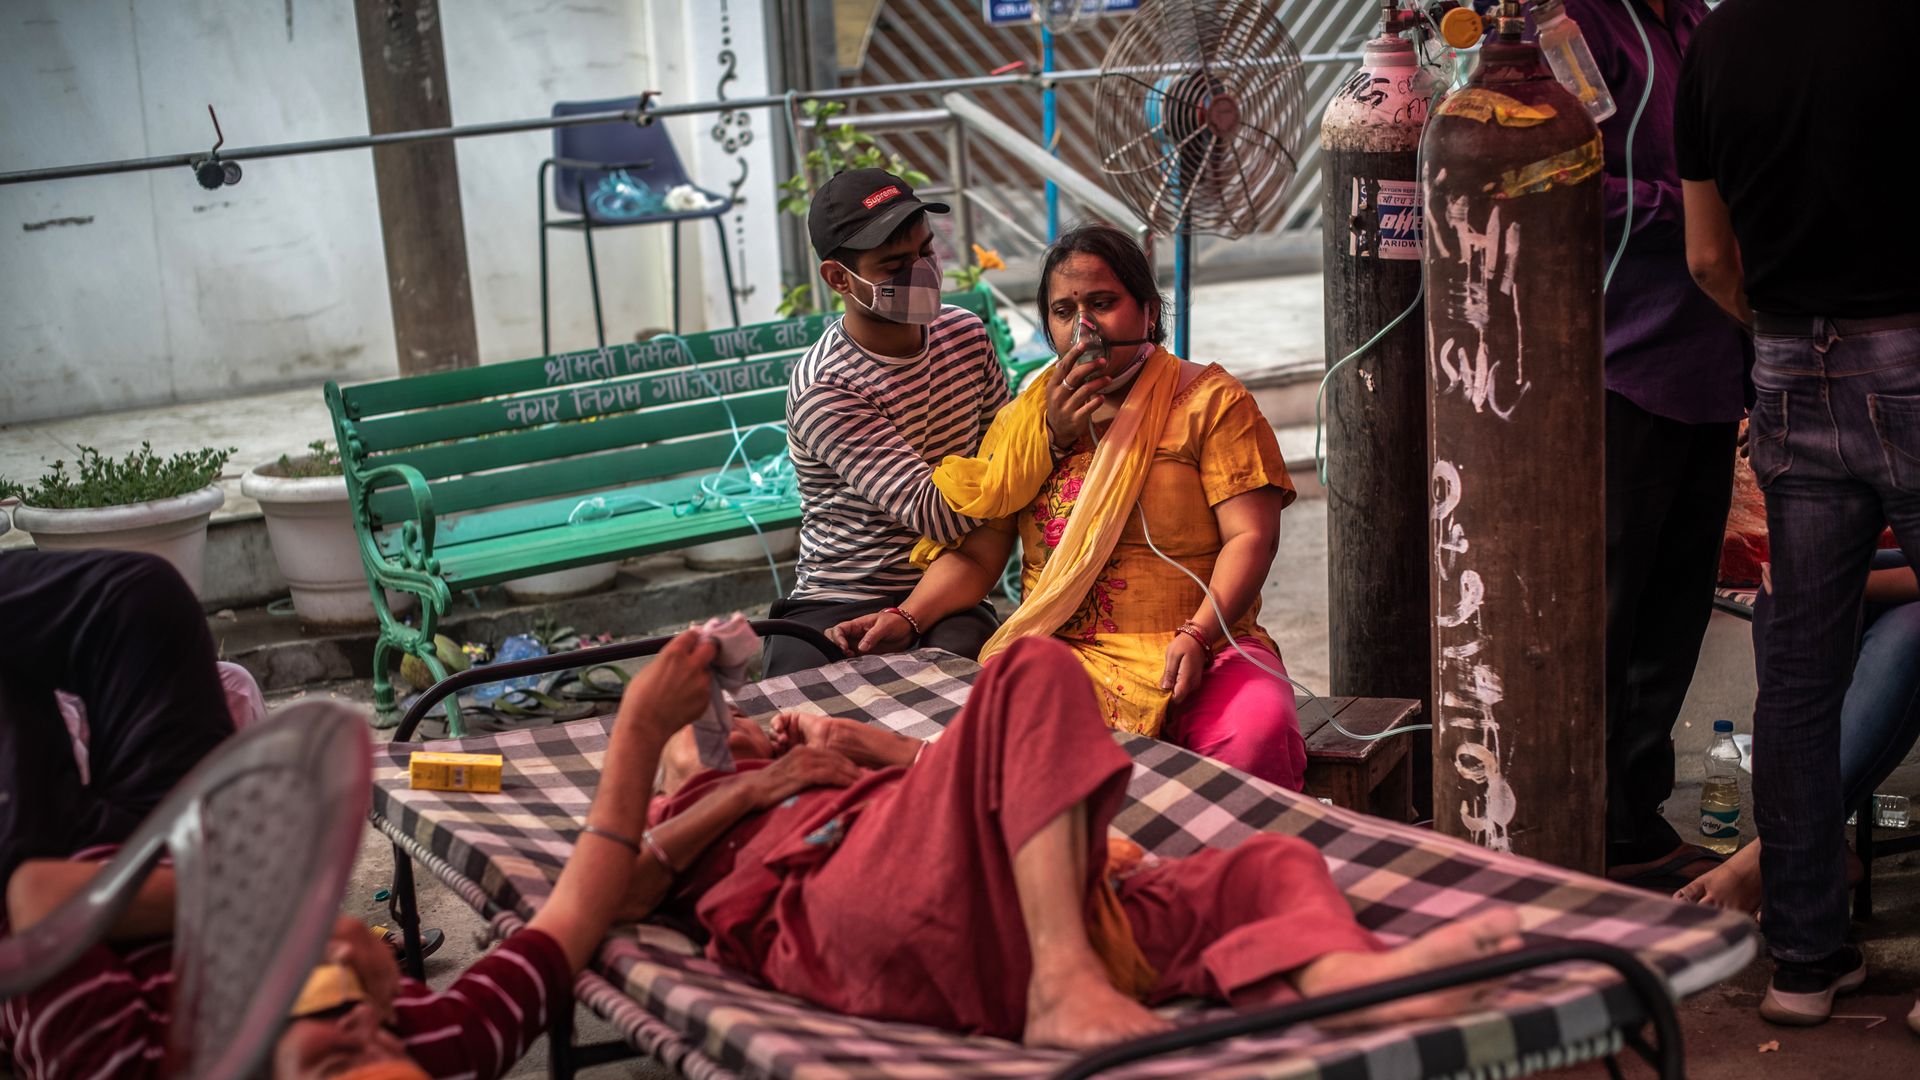  Patients suffering from Covid-19 are treated with free oxygen at a makeshift clinic outside the Shri Guru Singh Sabha Gurdwara on May 02, 2021 in Indirapuram, Uttar Pradesh, India. 